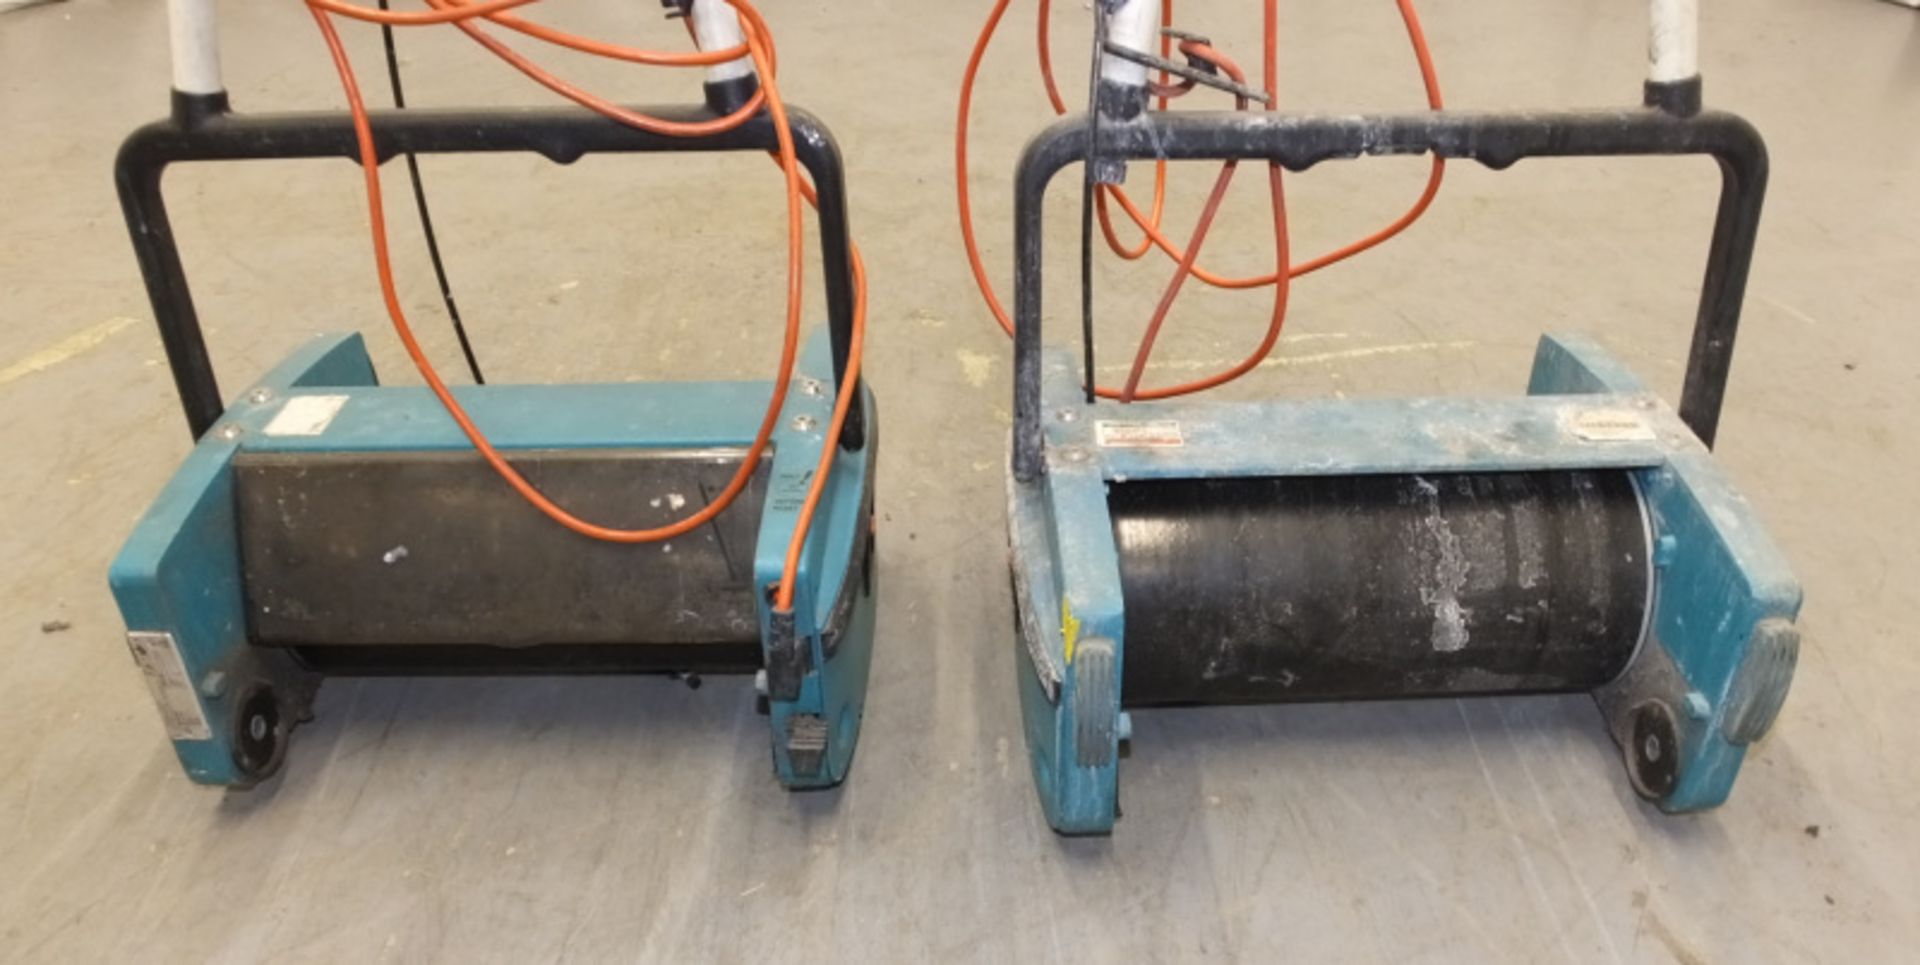 2 x Truvox Multiwash Floor and Carpet Scrubber Dryers, types- MW340, spares and repairs - Image 2 of 4